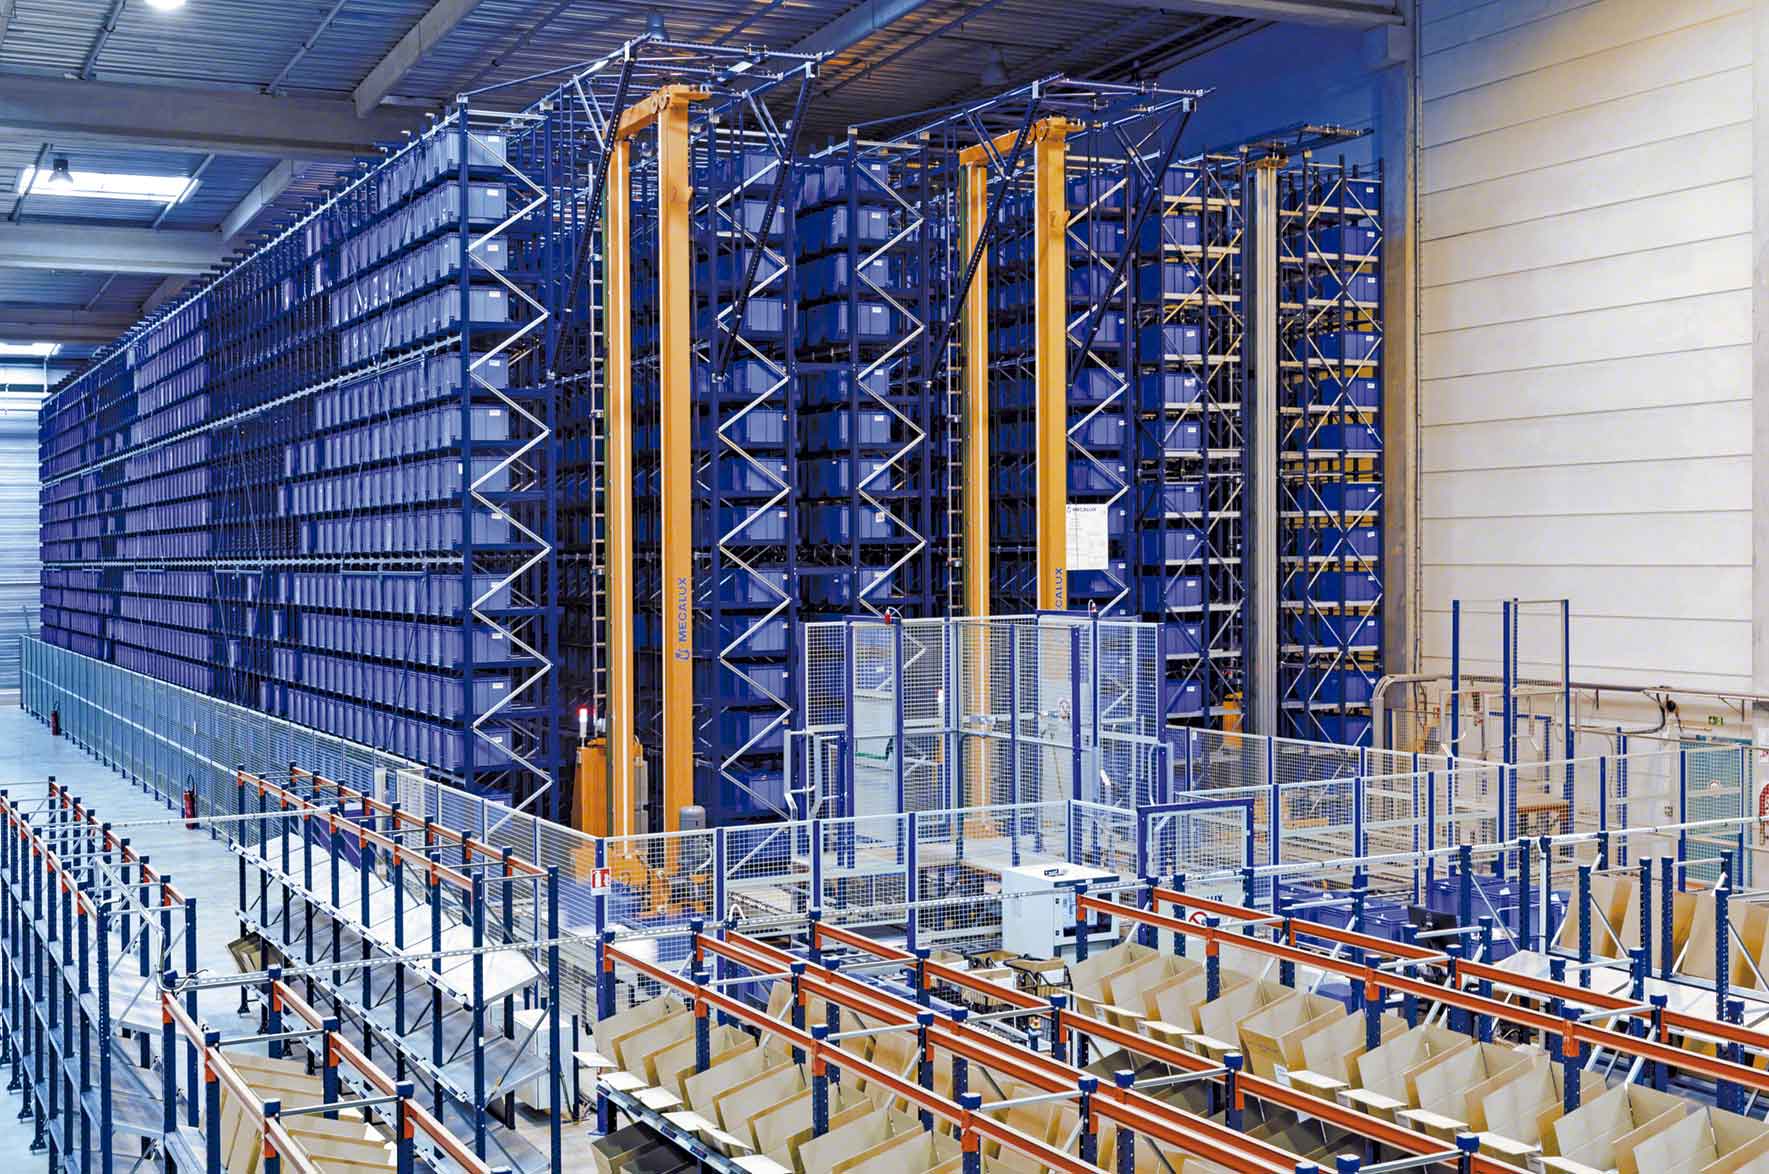 The various types of  automated storage and retrieval systems fulfill any logistics need